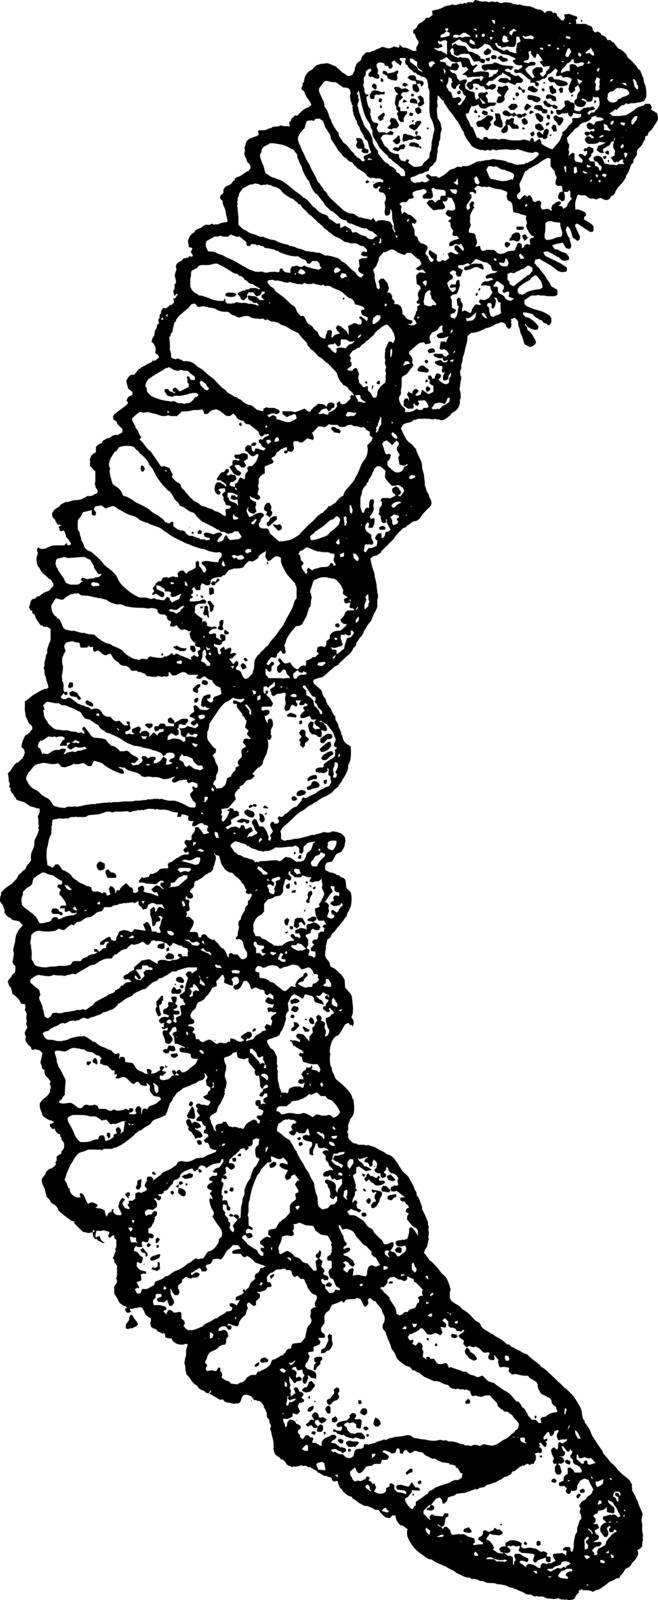 Potato Stalk Borer Larva with a black snout and three small black spots at the base of the wing covers, vintage line drawing or engraving illustration.